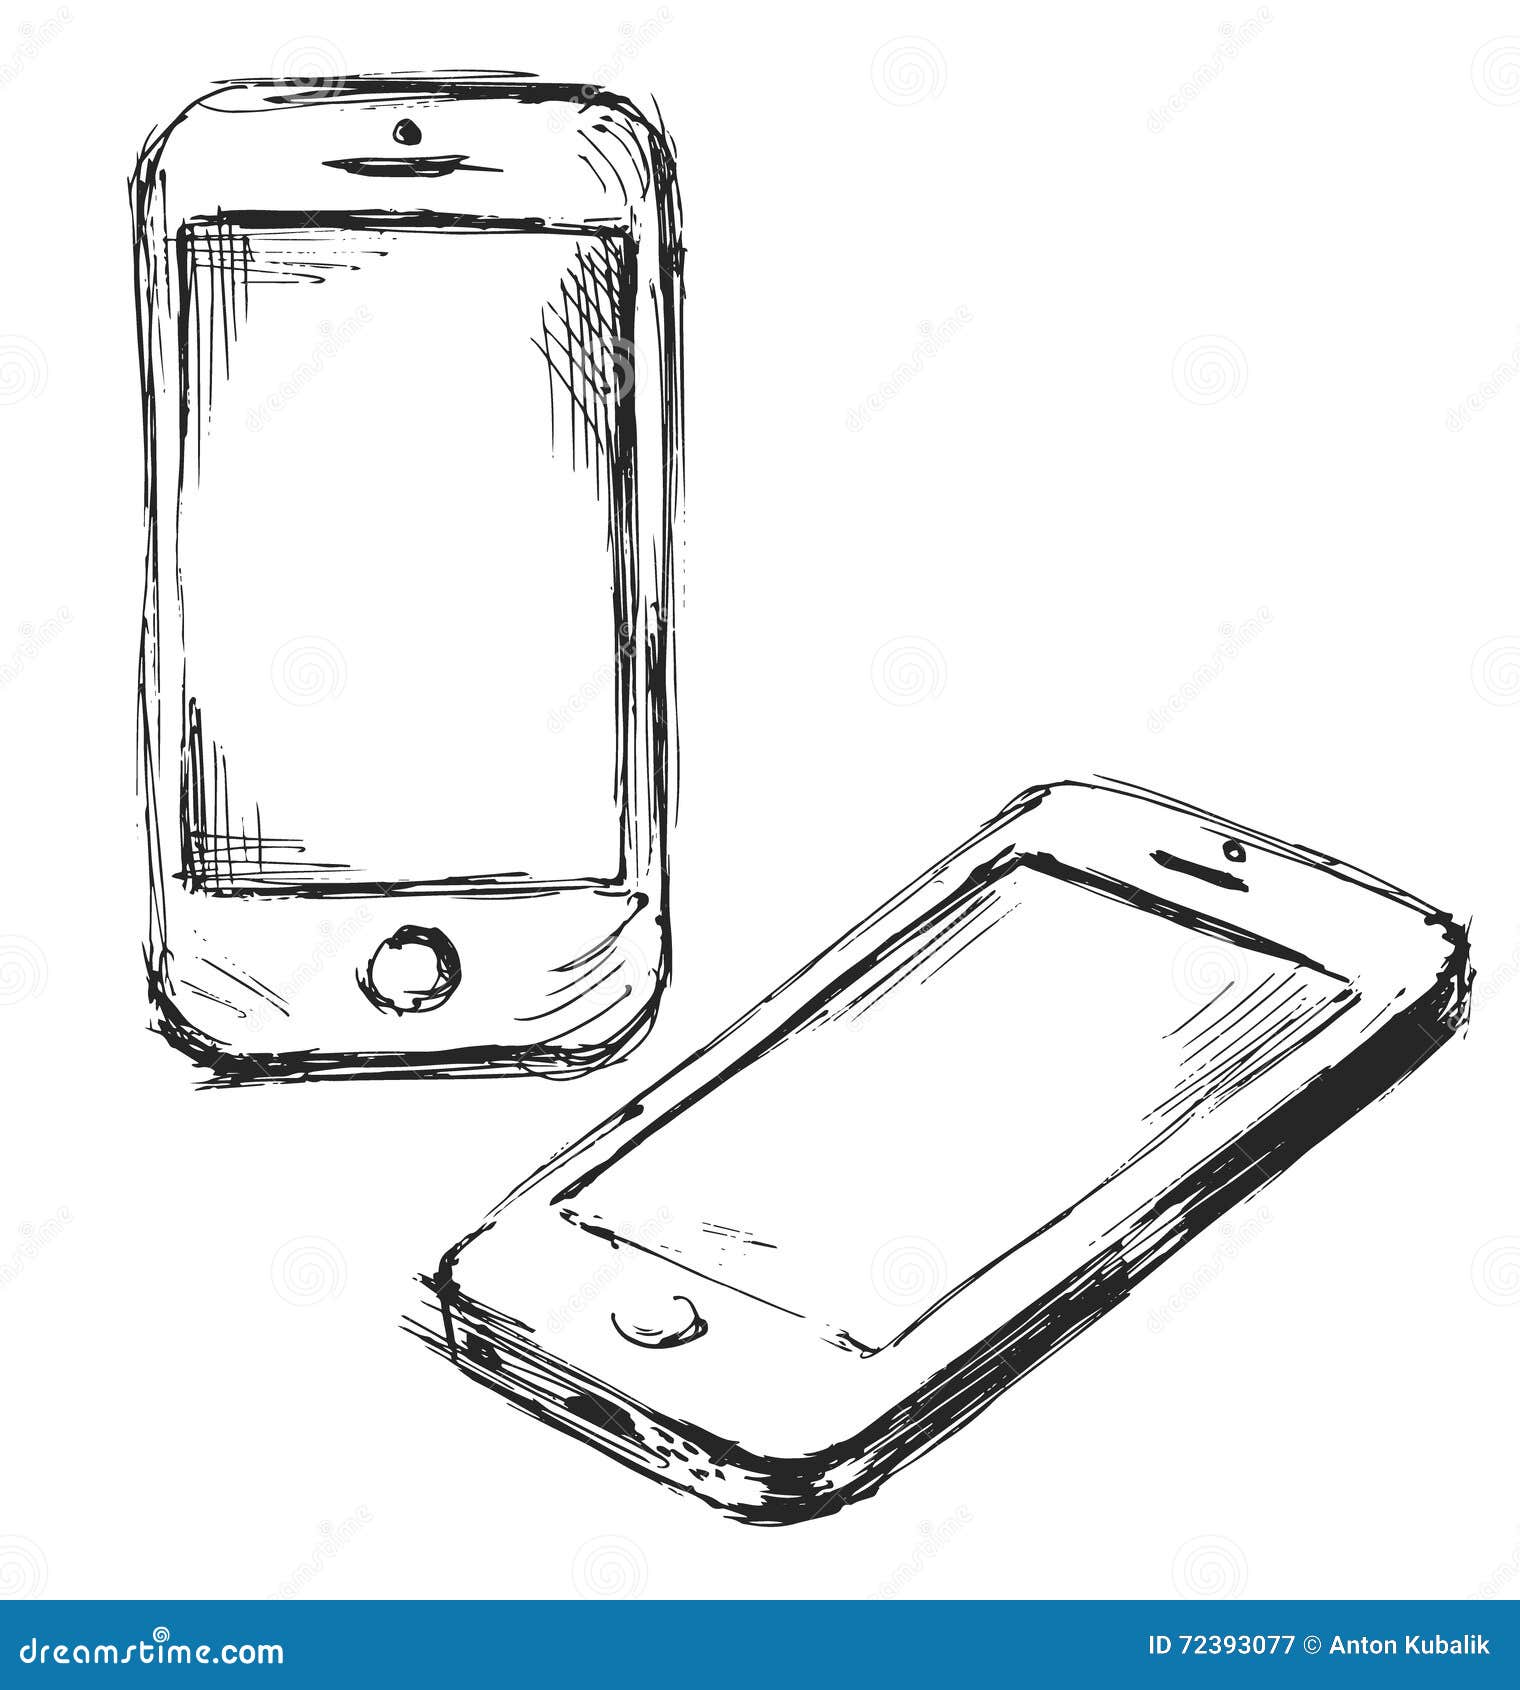 15700 Smartphone Sketch Stock Photos Pictures  RoyaltyFree Images   iStock  Smartphone illustration